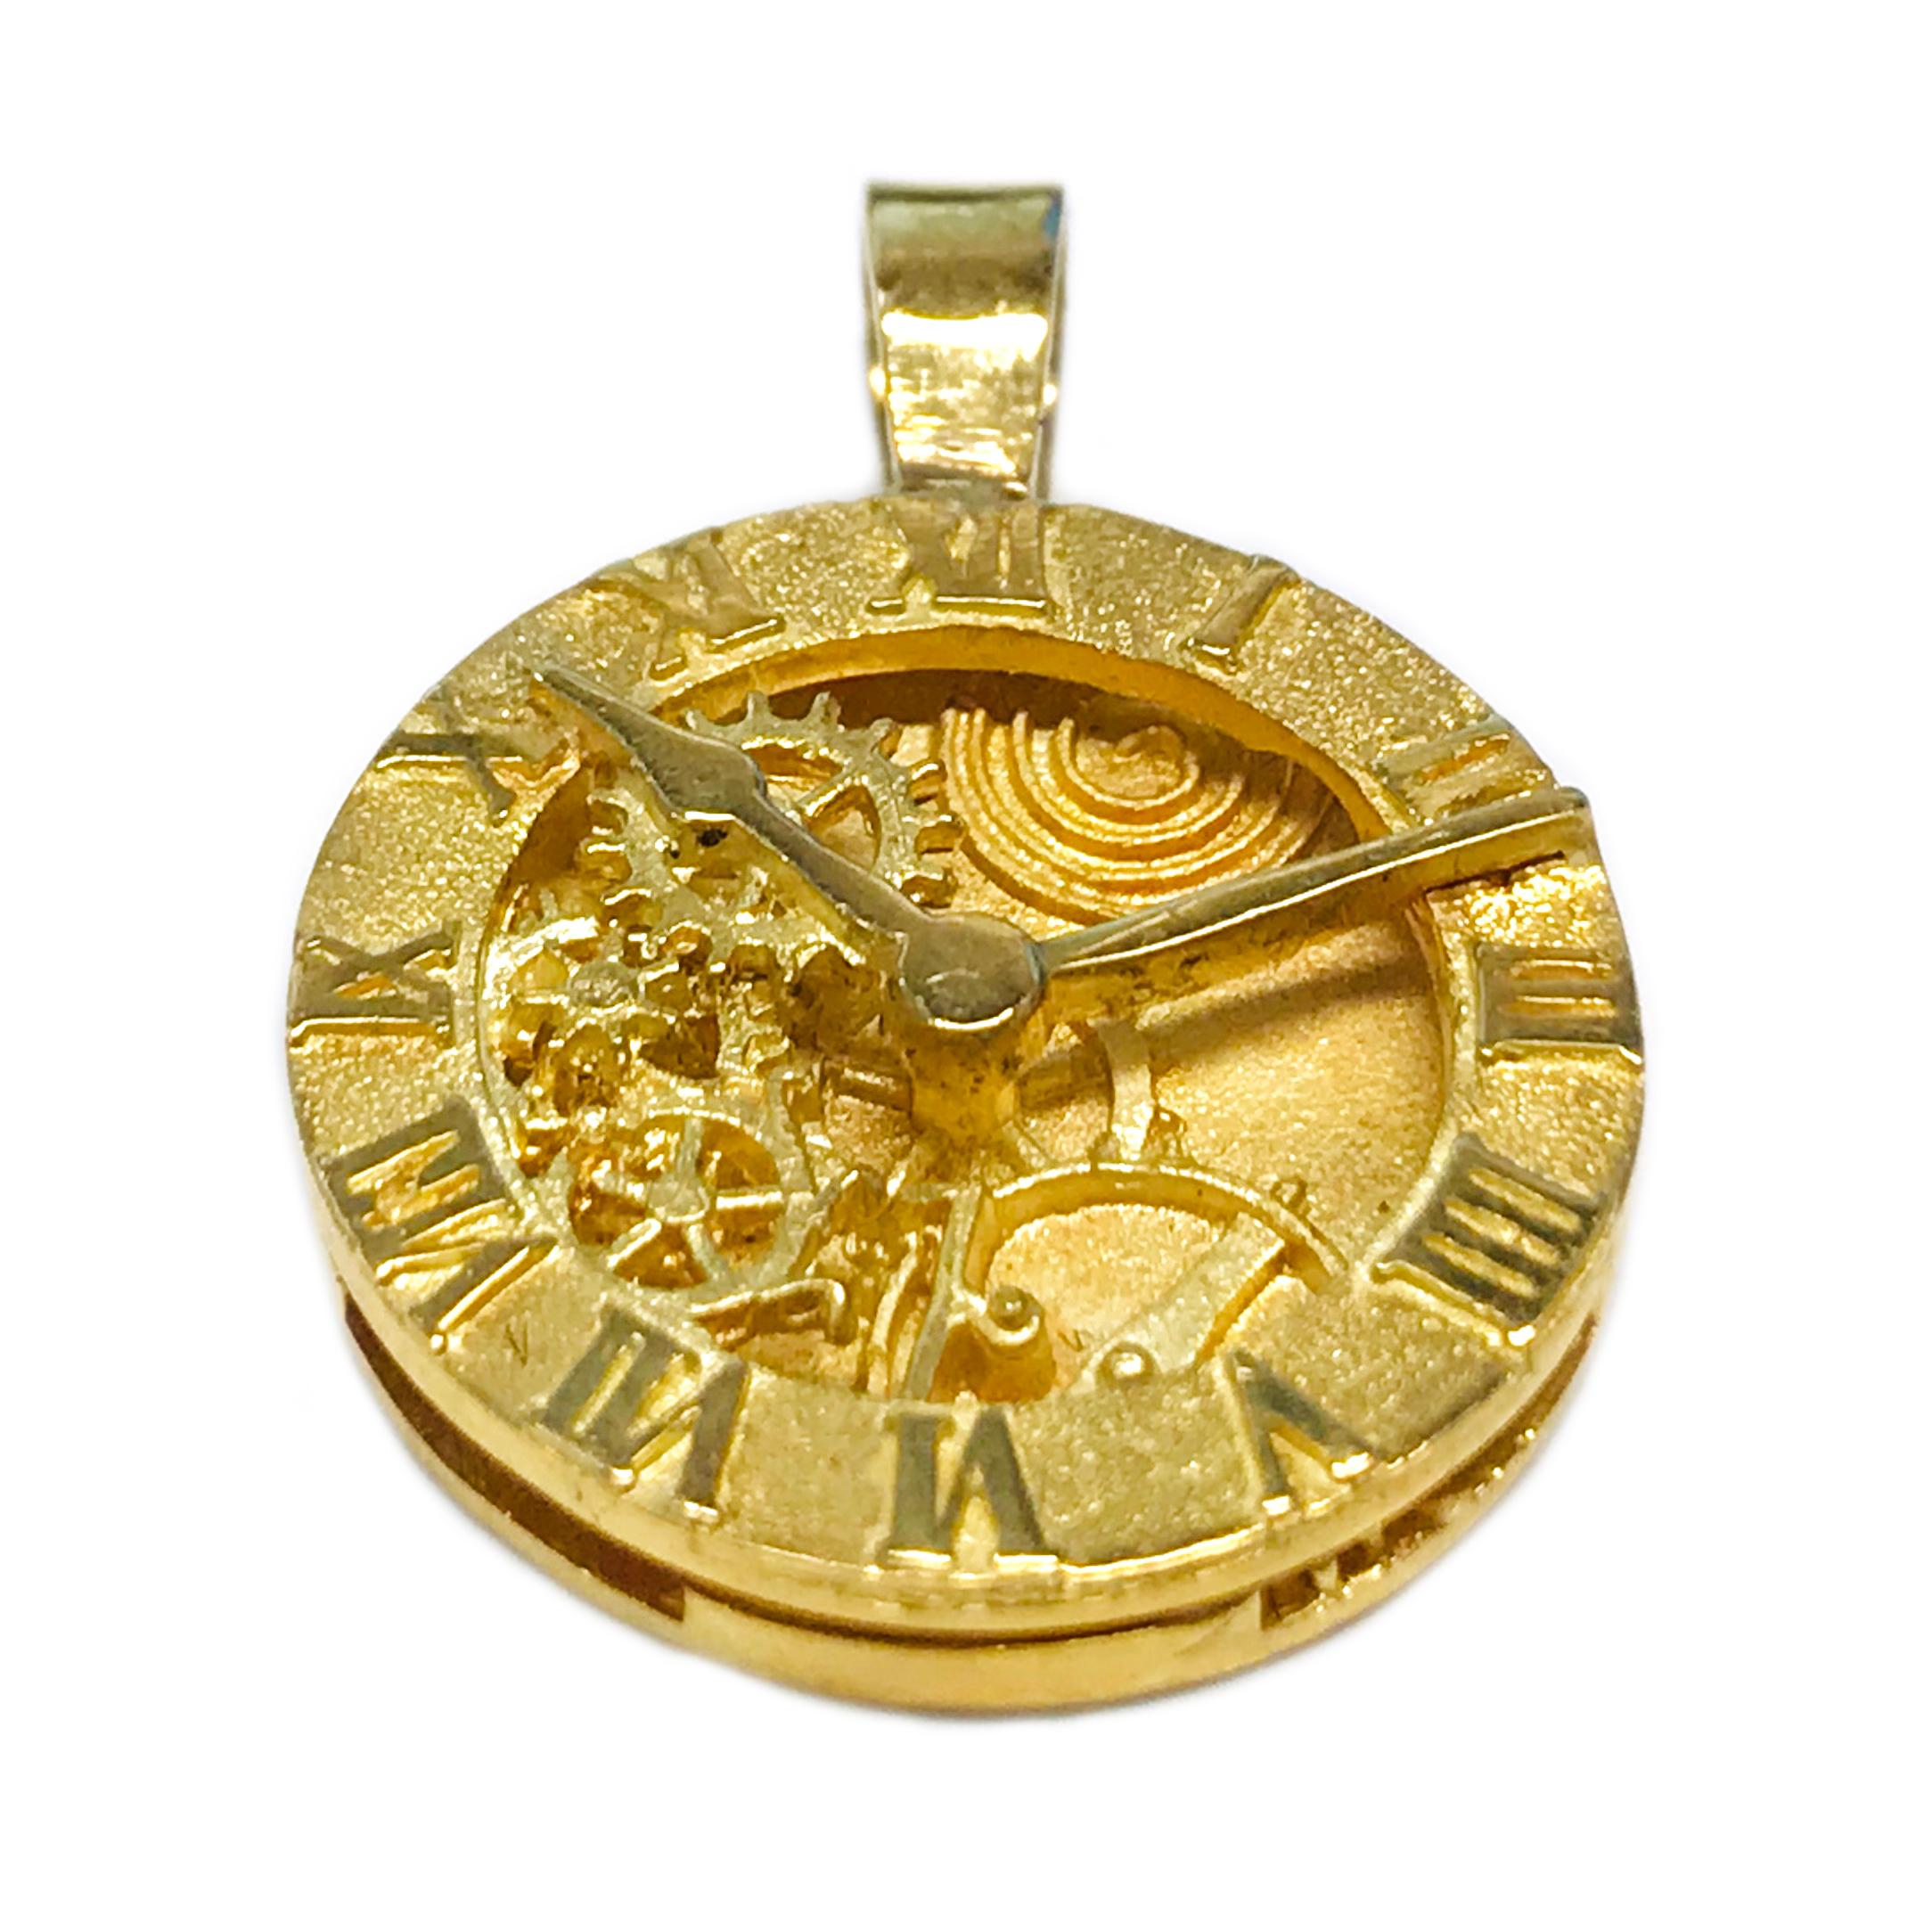 18 Karat Custom Clock Pendant. This is a custom stunning one-of-a-kind pendant. The clock has multi-layers of meticulous detail in smooth and stone finishes. The circle pendant measures 20mm in diameter. Engraved on the back is 18k JBG. The total